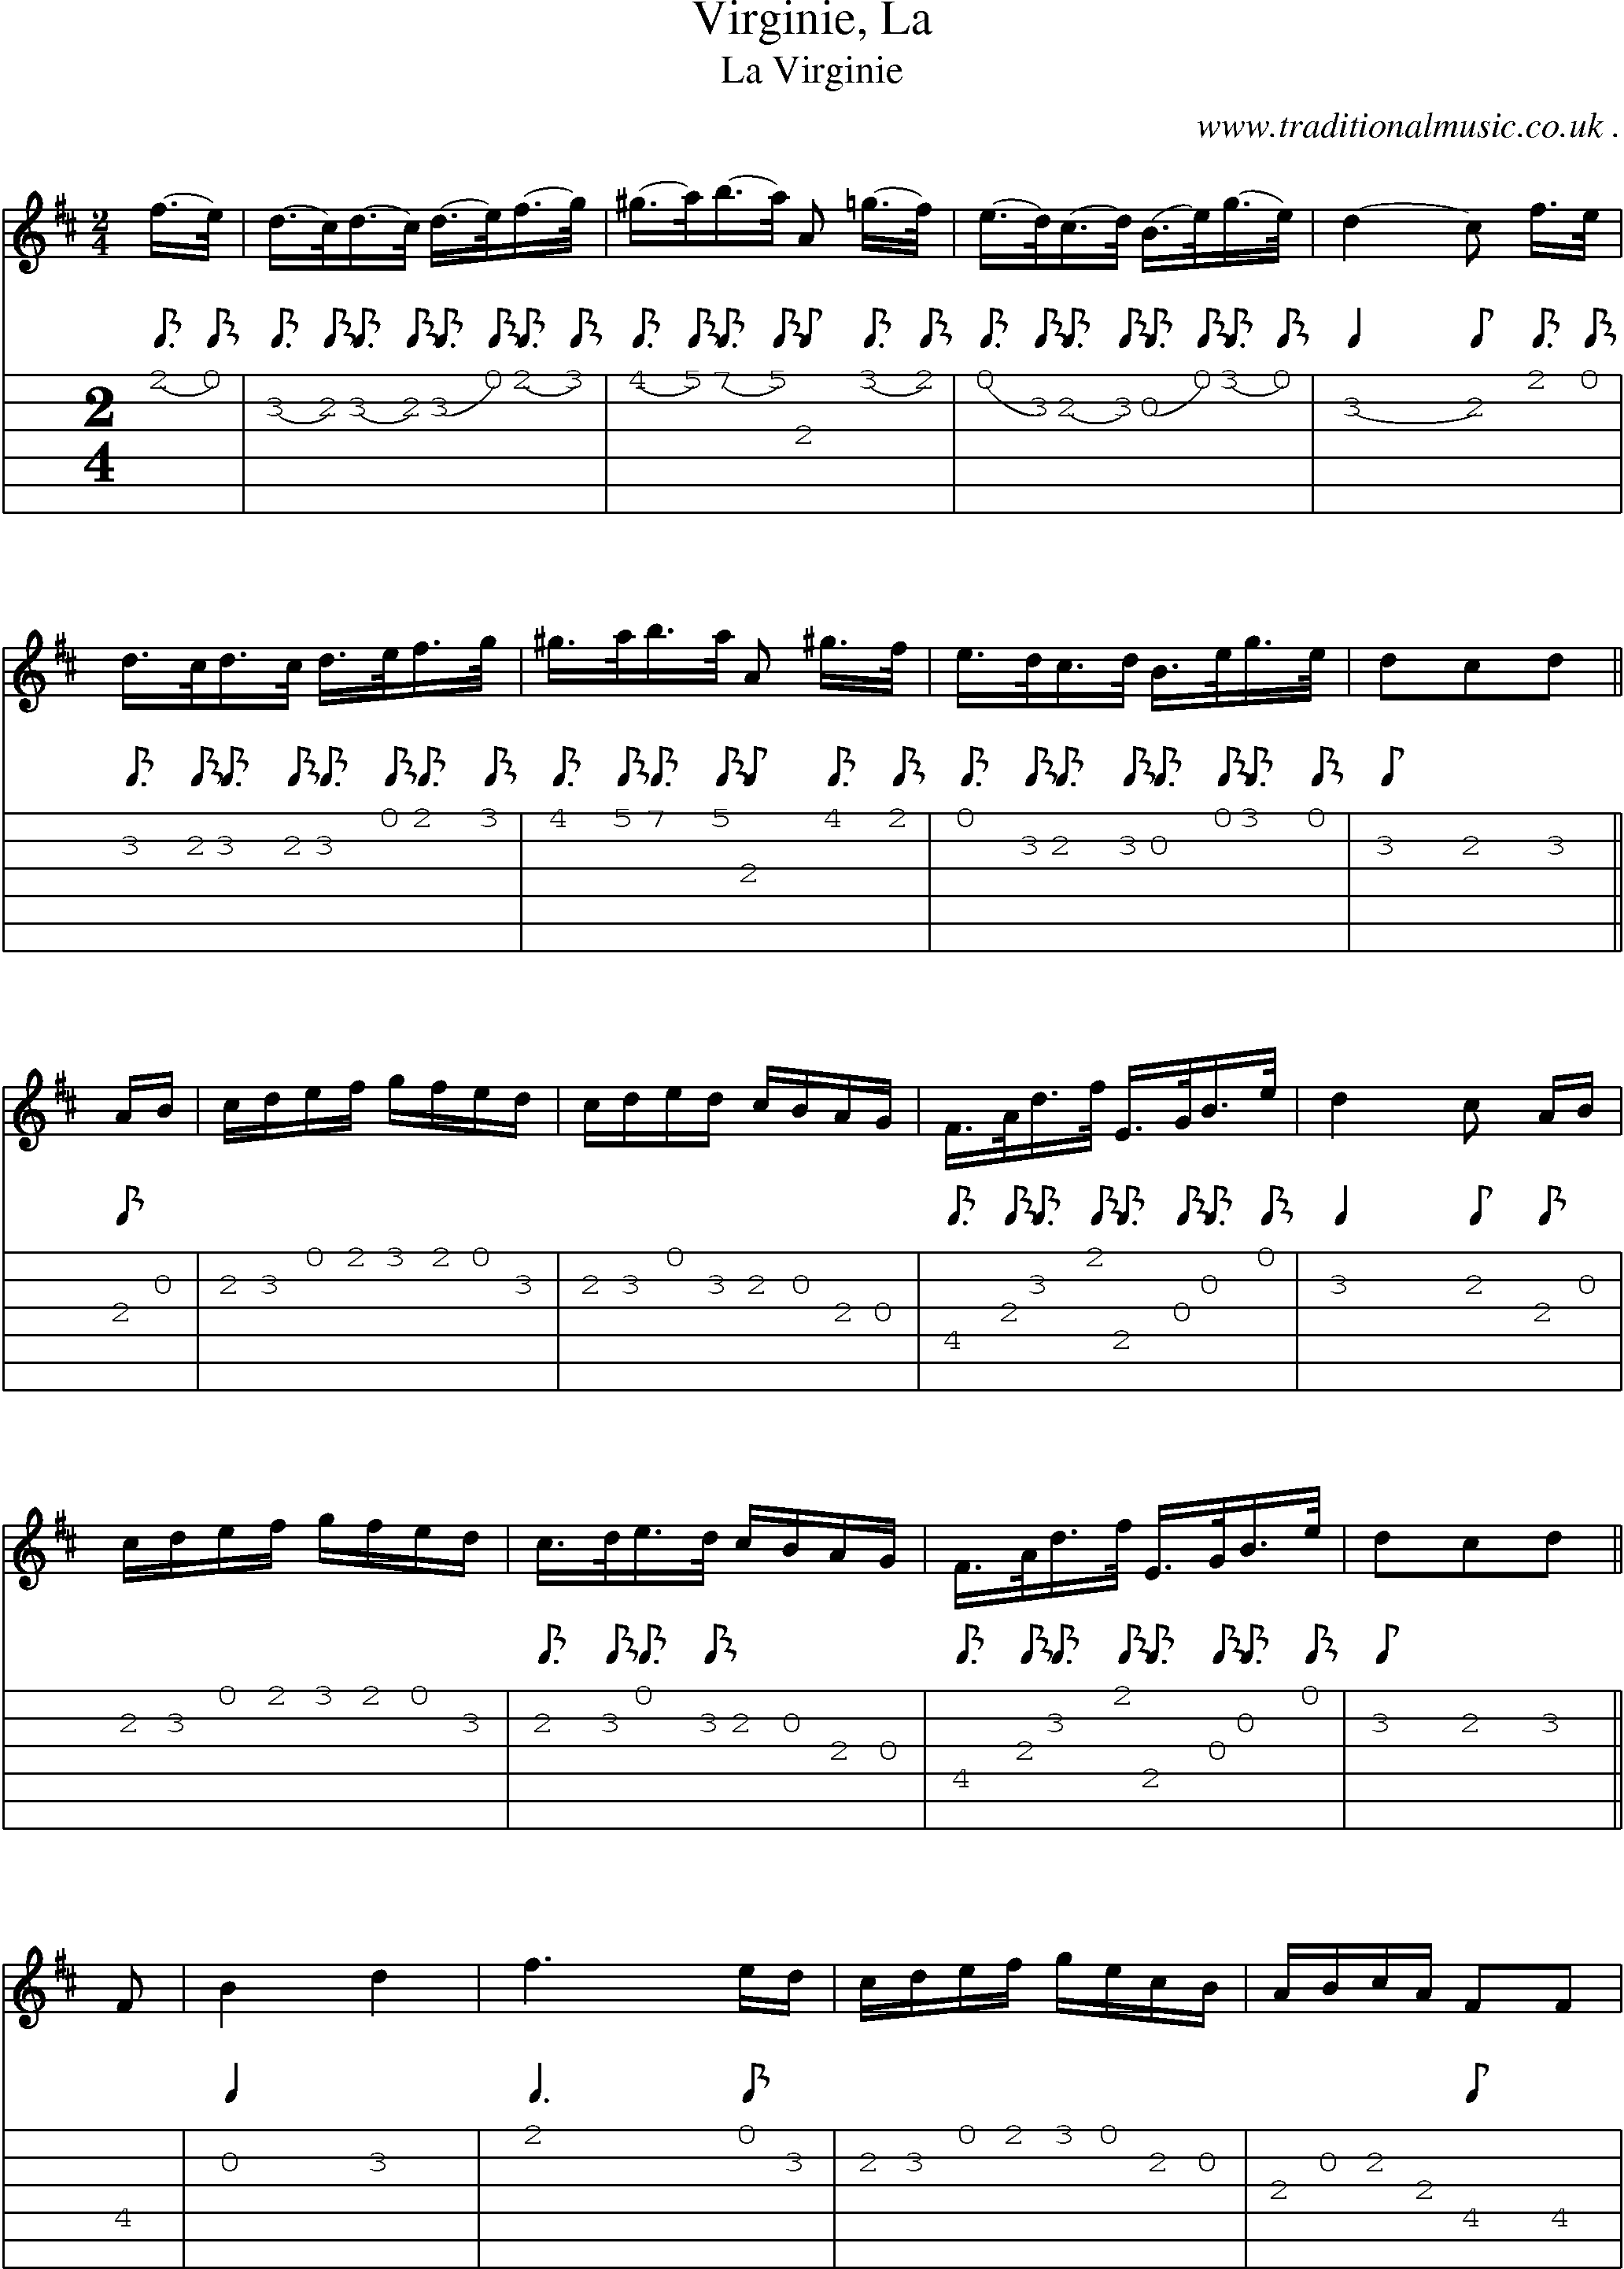 Sheet-Music and Guitar Tabs for Virginie La